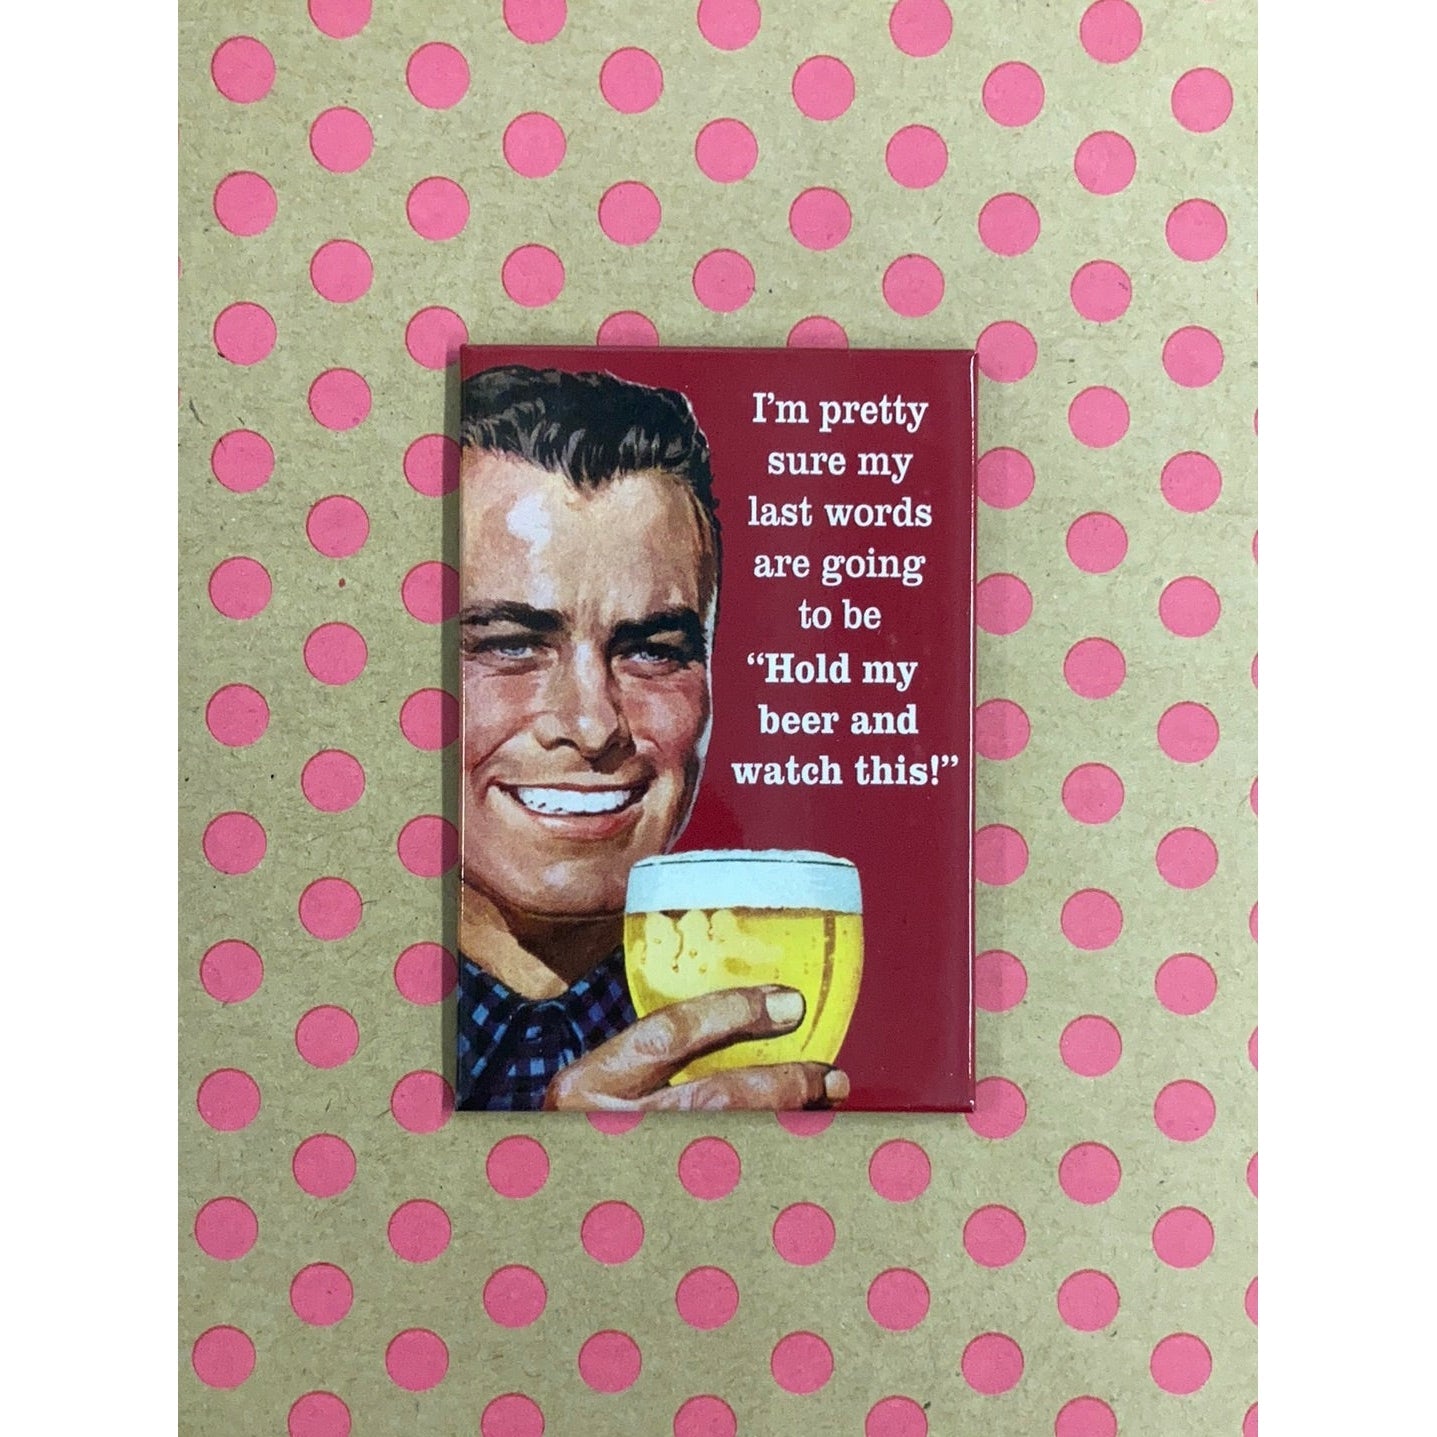 I'm Pretty Sure My Last Words Are Going To Be "Hold My Beer And Watch This" Fridge Magnet | 2" x 3"